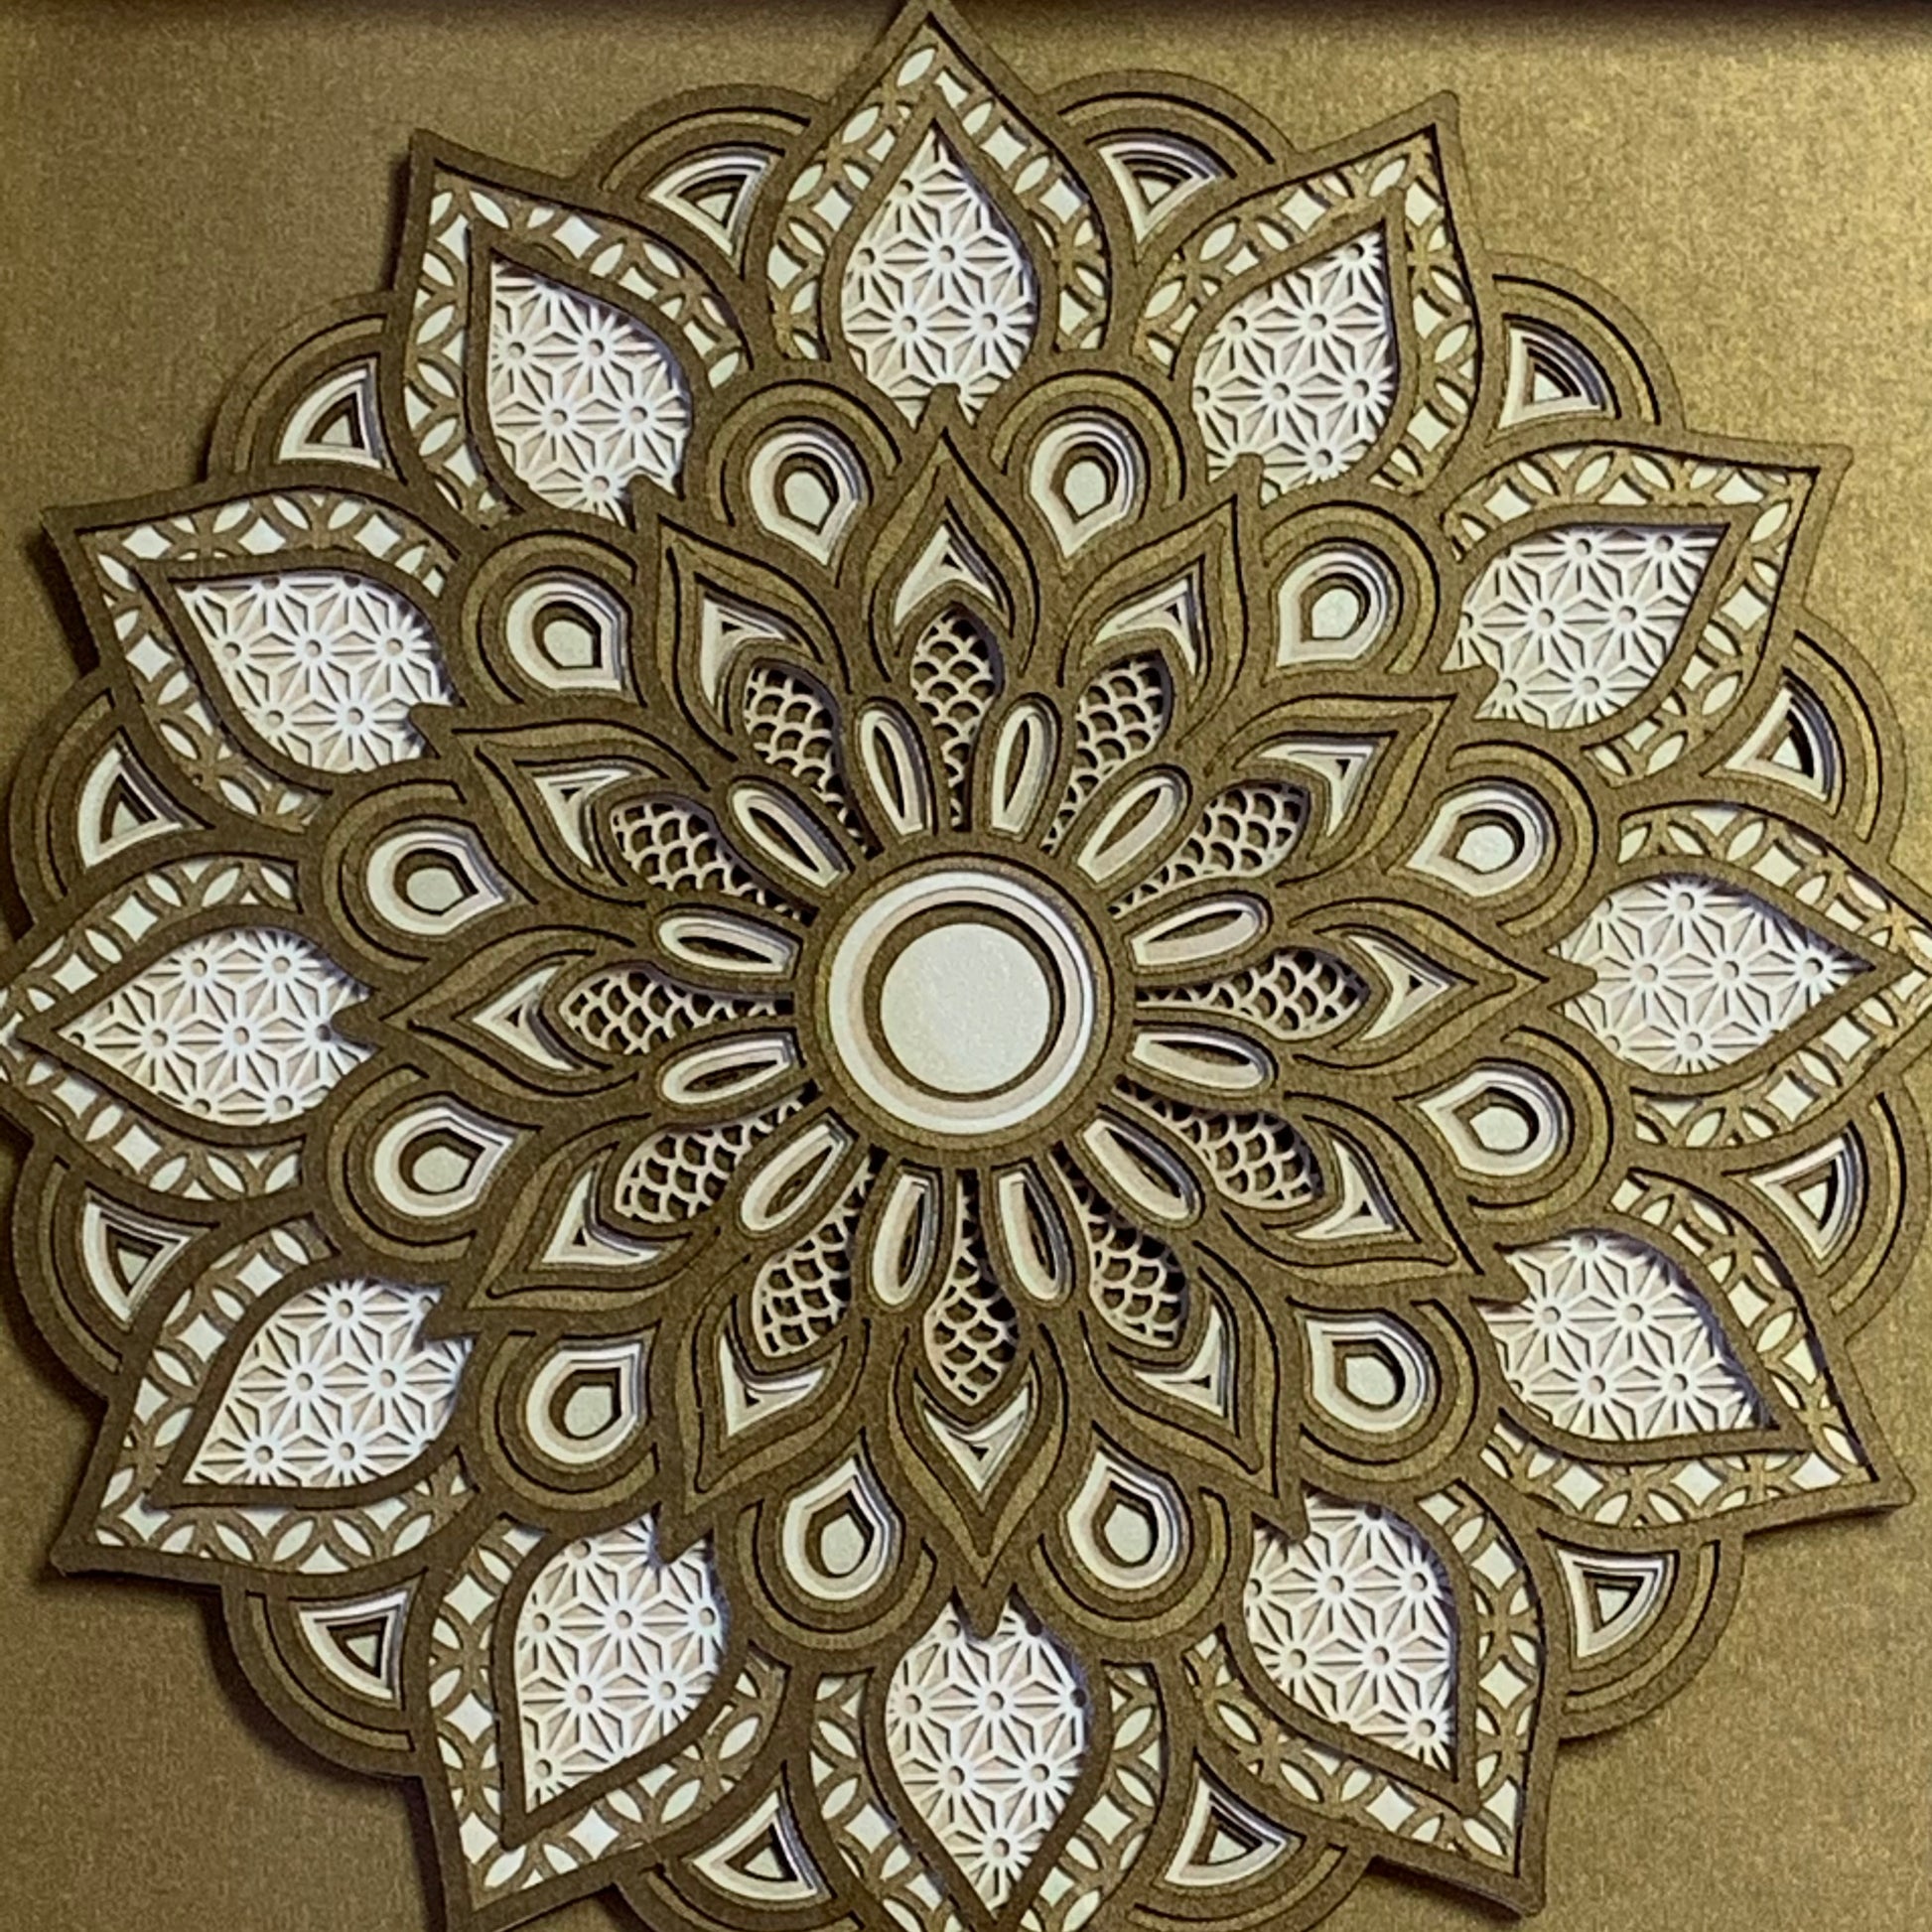 Cricut Mandala Instant Download Cut Files. Formats for other cutting machines as well included. Check the complete description. Sized for 12 Inch Shadow Boxes. Complete instructions on Home Stitchery Decor YouTube Channel. Create mesmerizing art for your own home or to gift! 